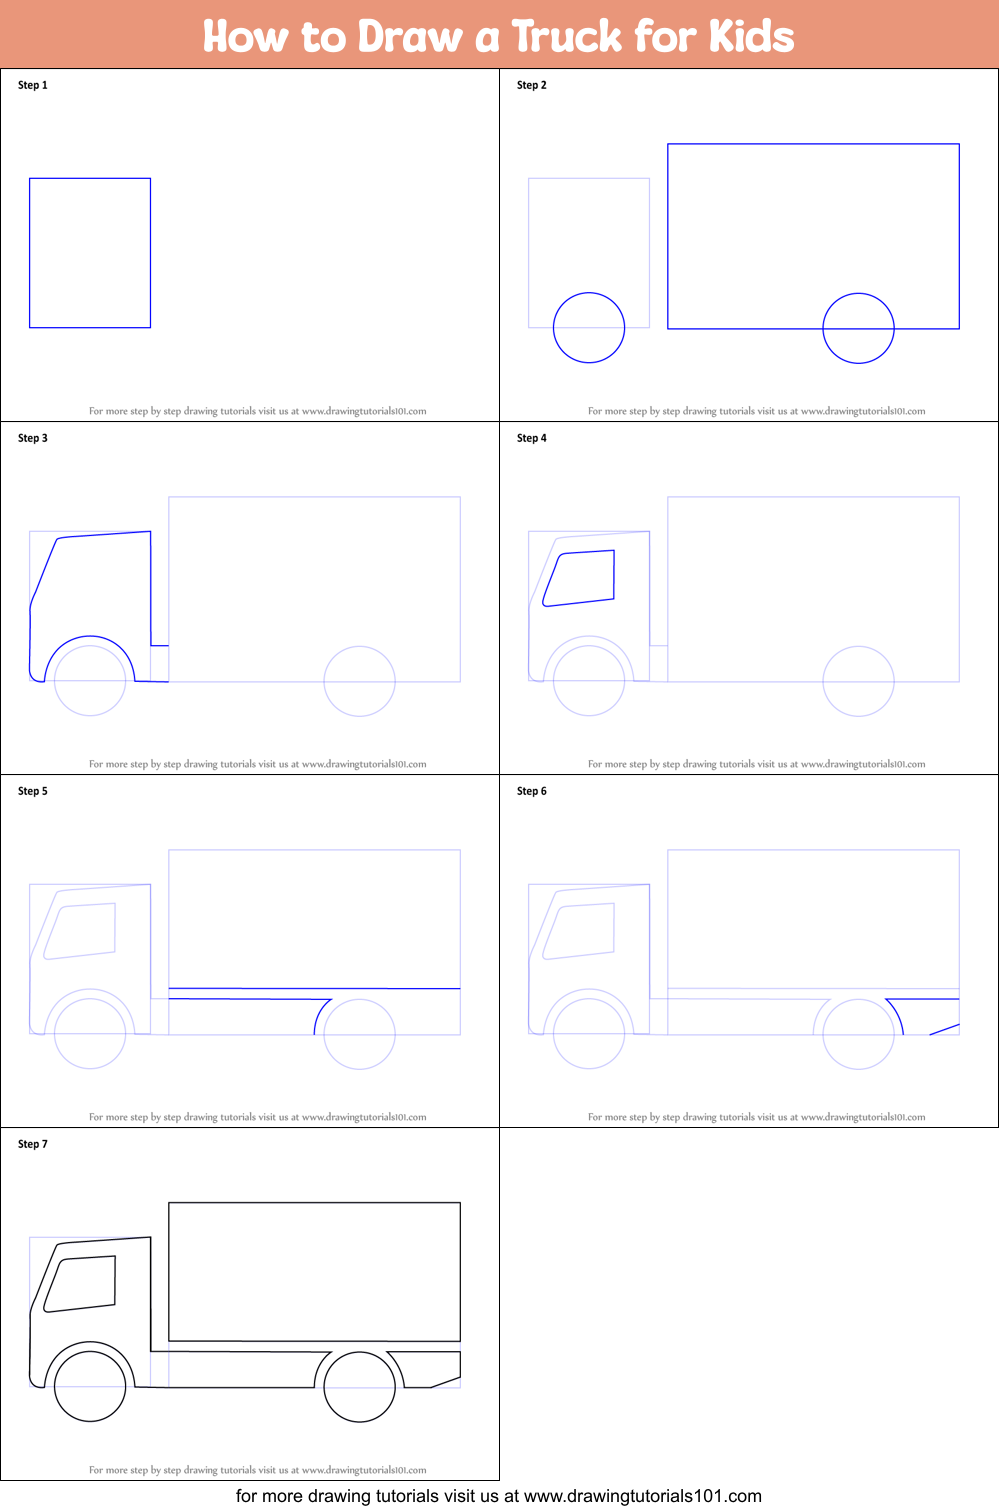 How to Draw a Truck for Kids printable step by step drawing sheet